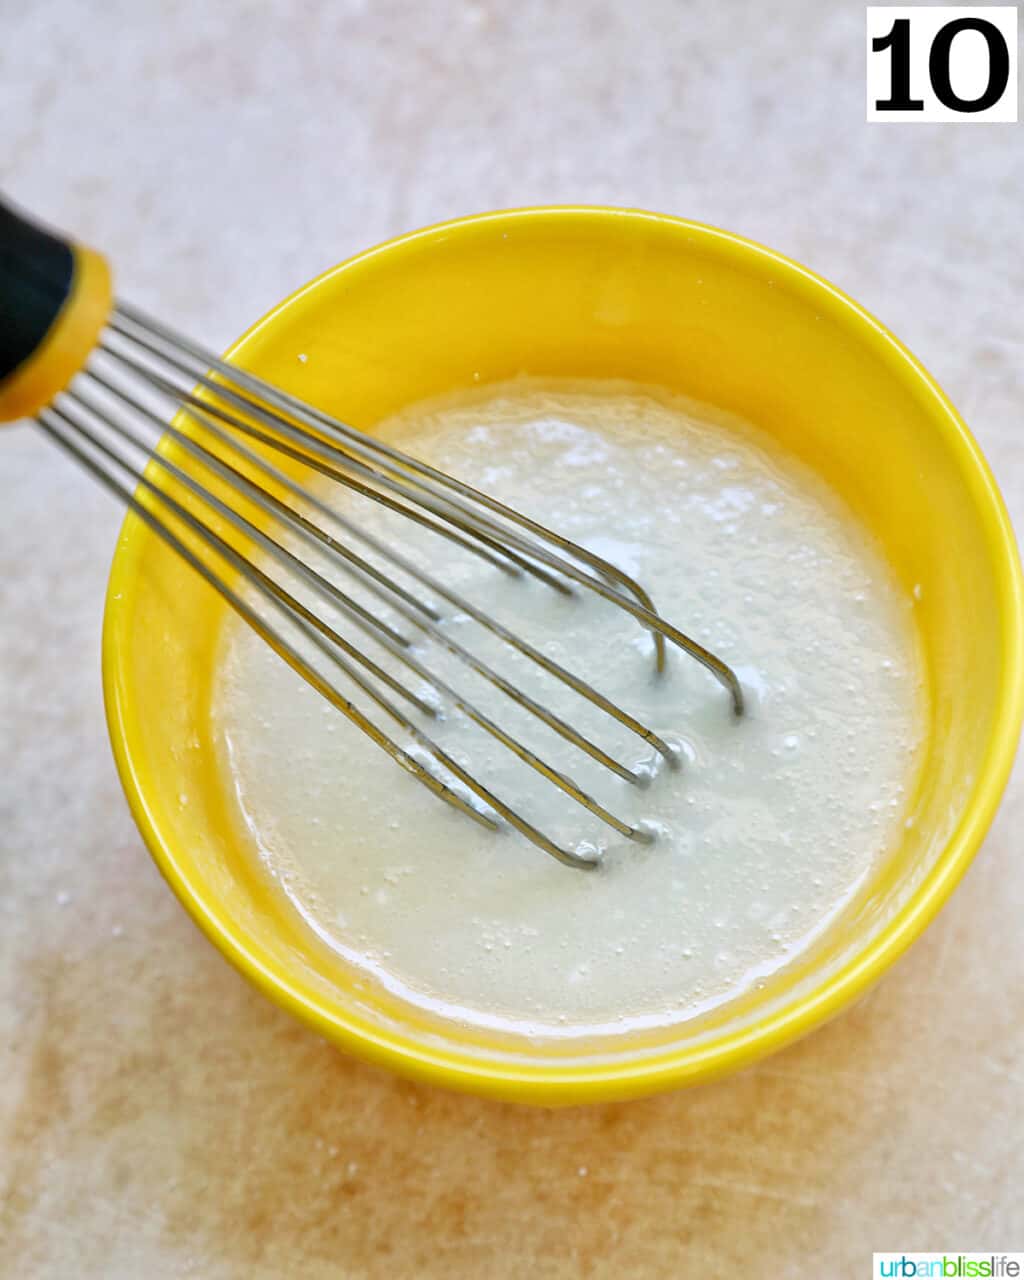 whisk in lemon glaze in a yellow bowl.